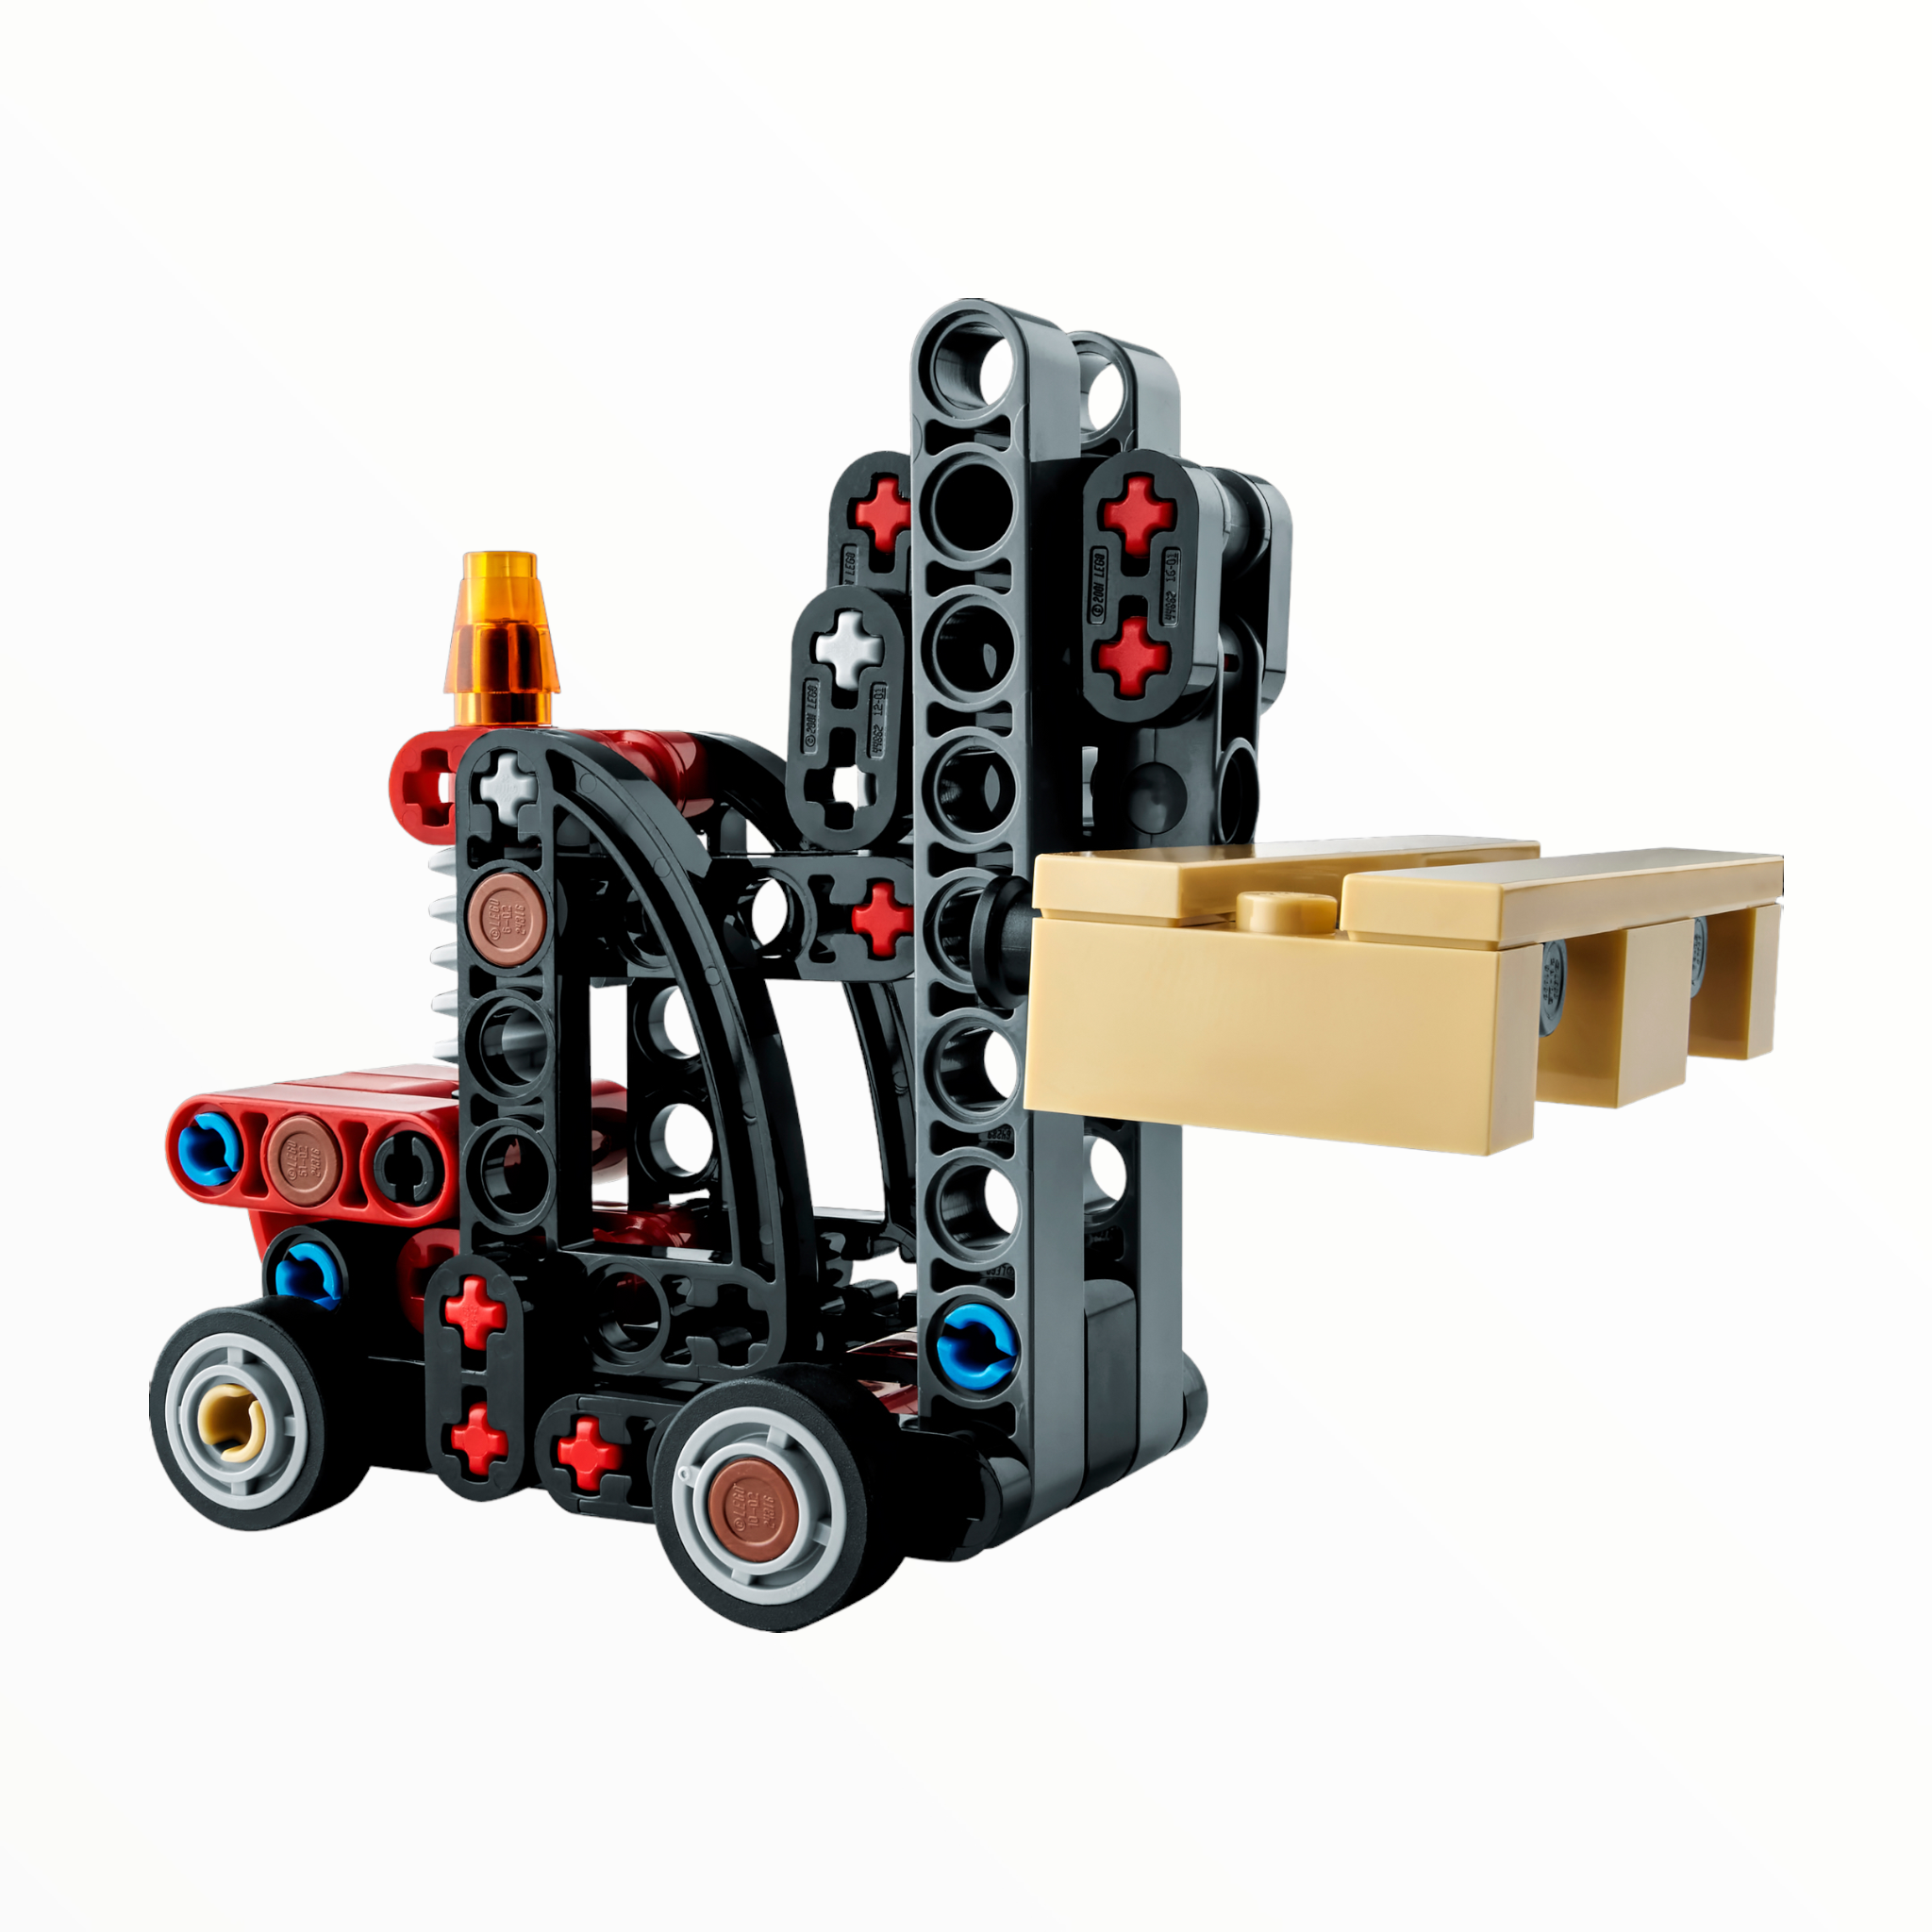 Polybag 30655 Technic Forklift with Pallet